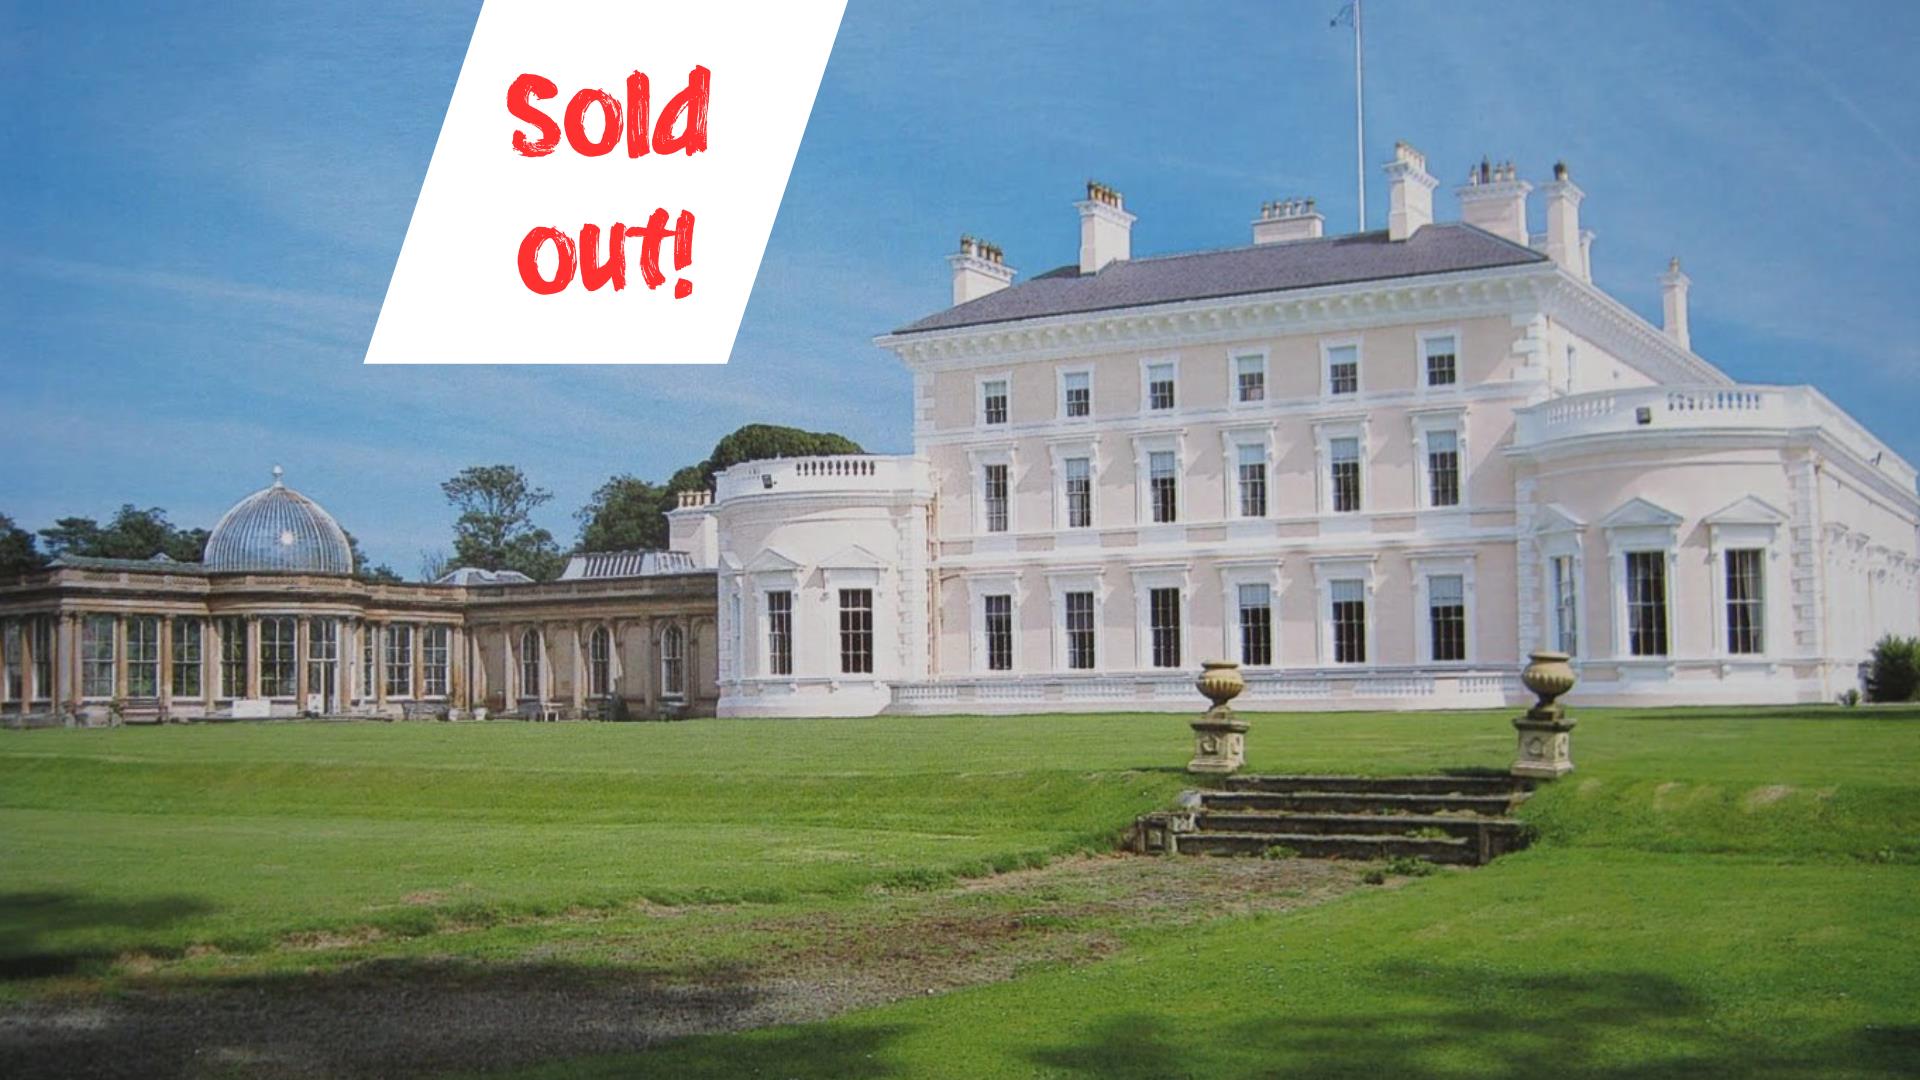 Ballywalter Park house exterior surrounding by greenery, now sold out